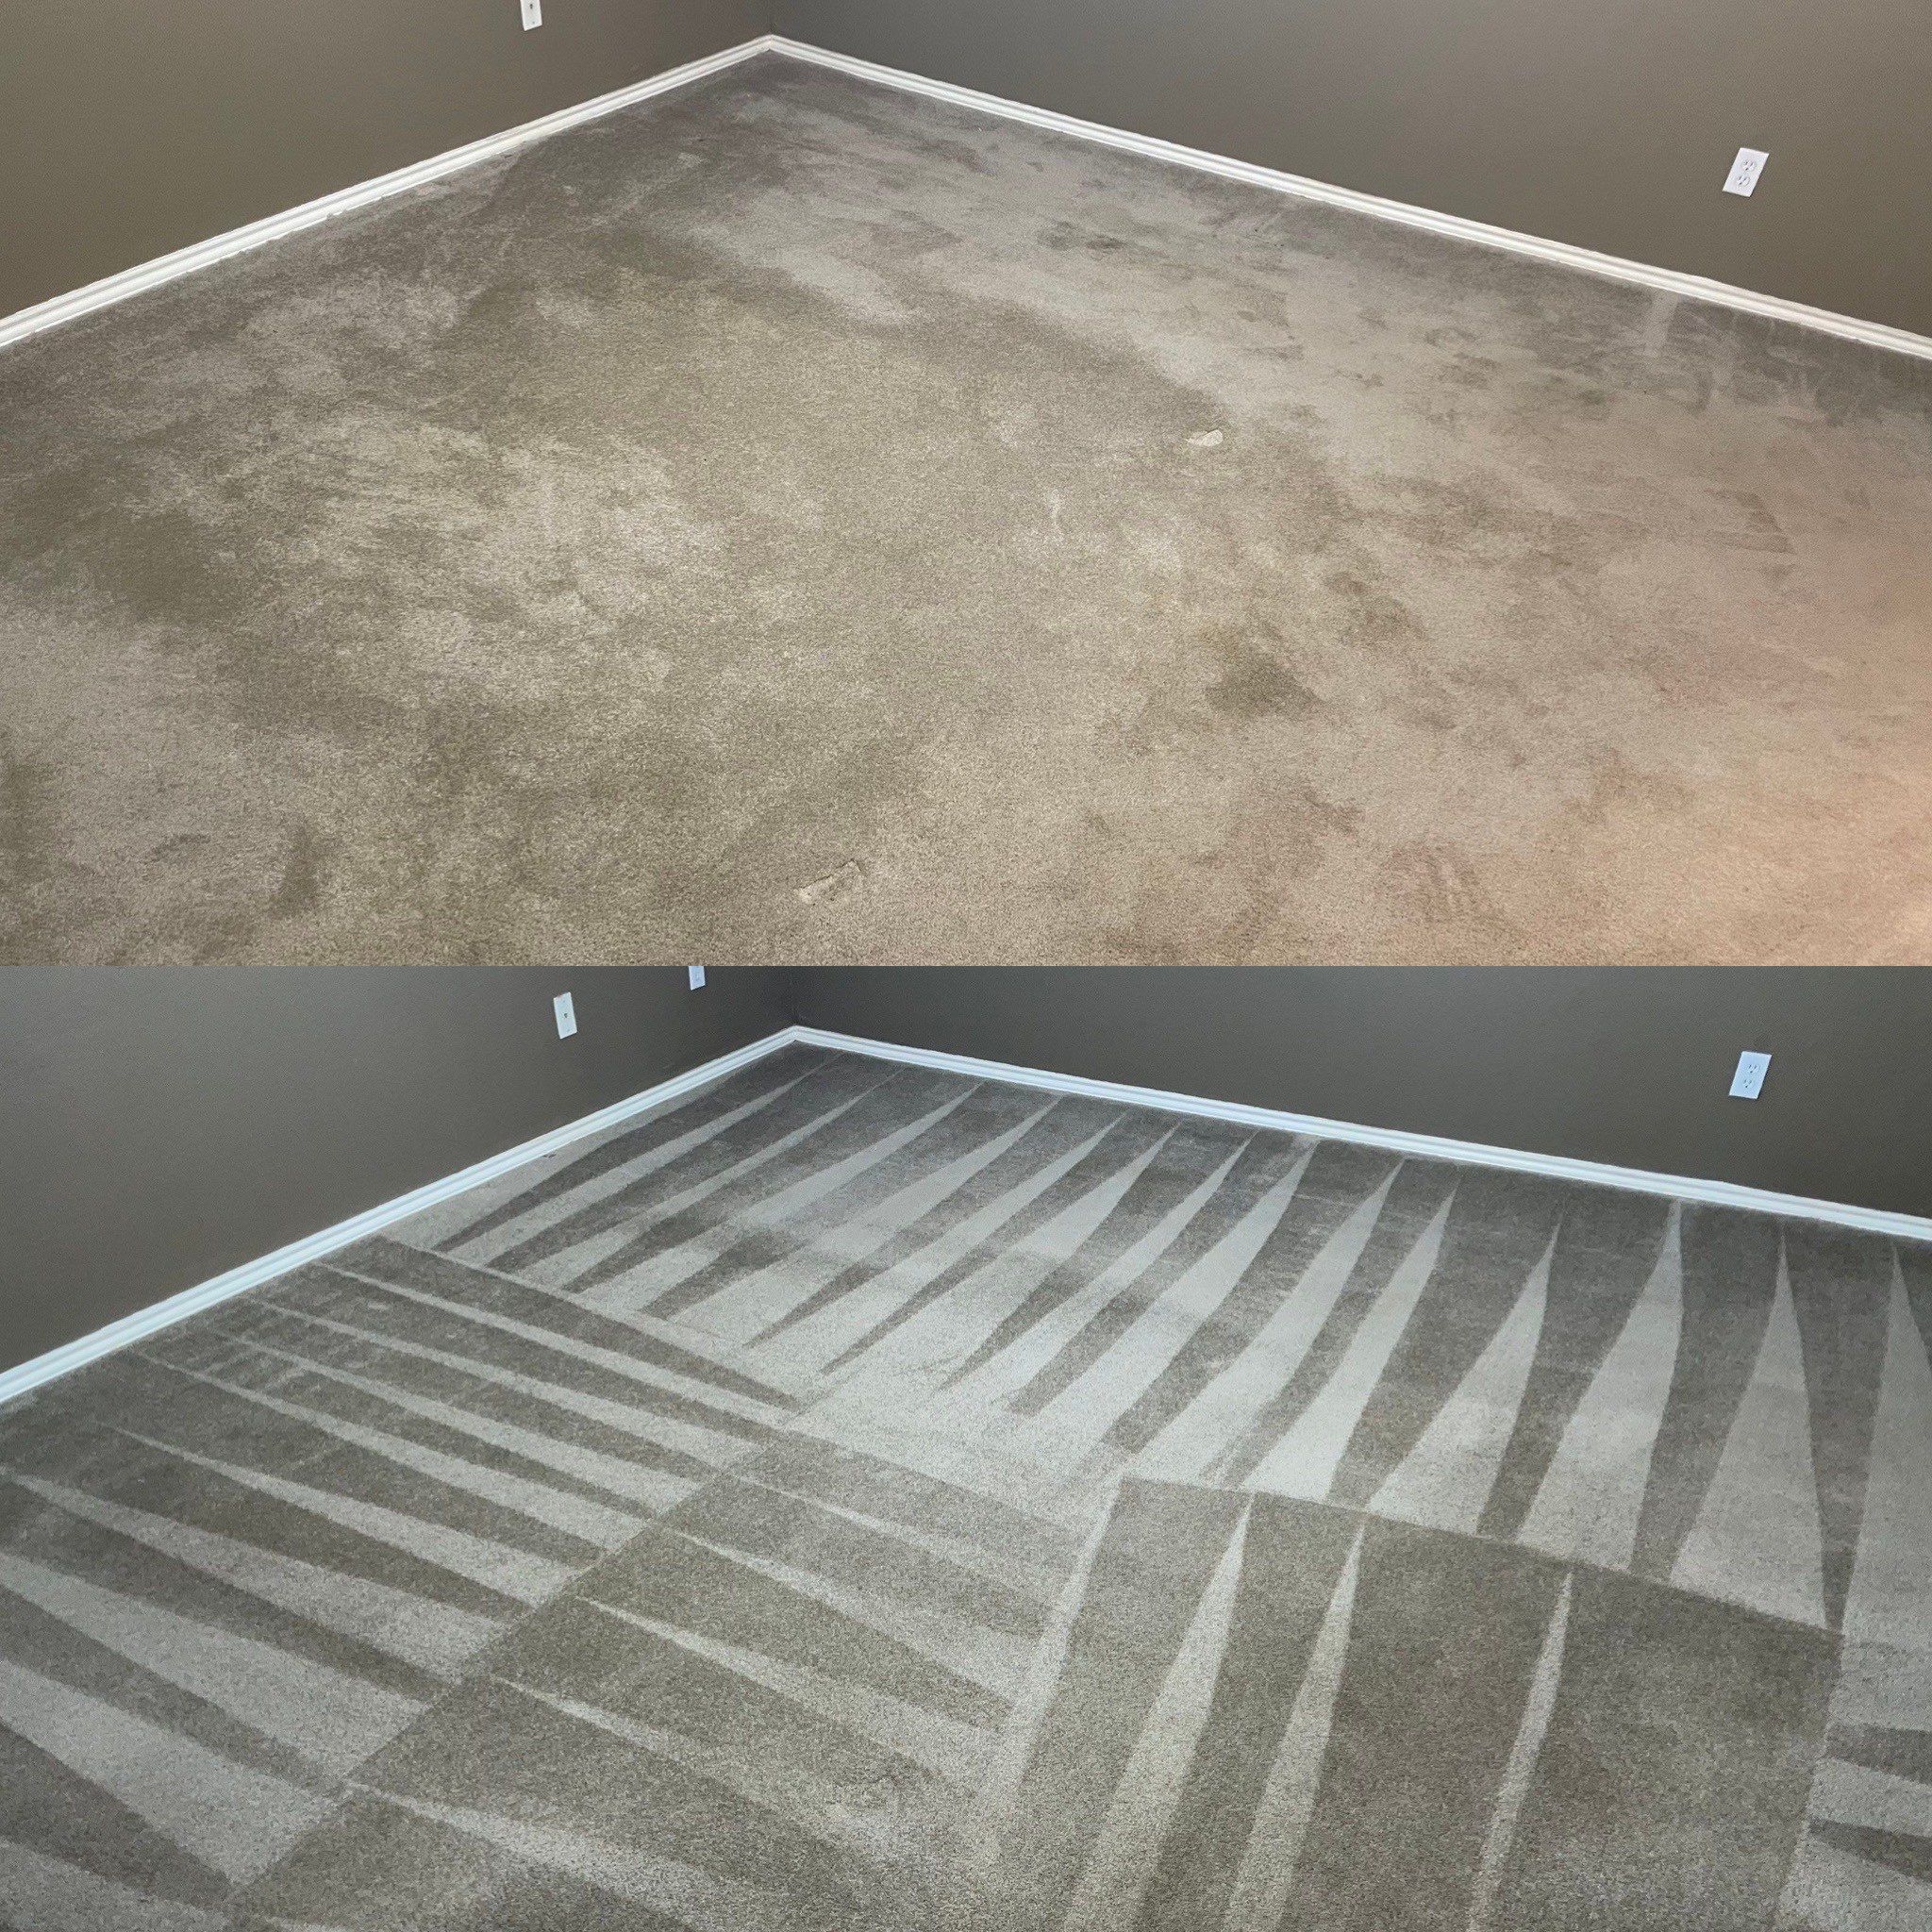 before and after deep steam carpet cleaning service removing dirt and stains leaving clean lines and refreshed look